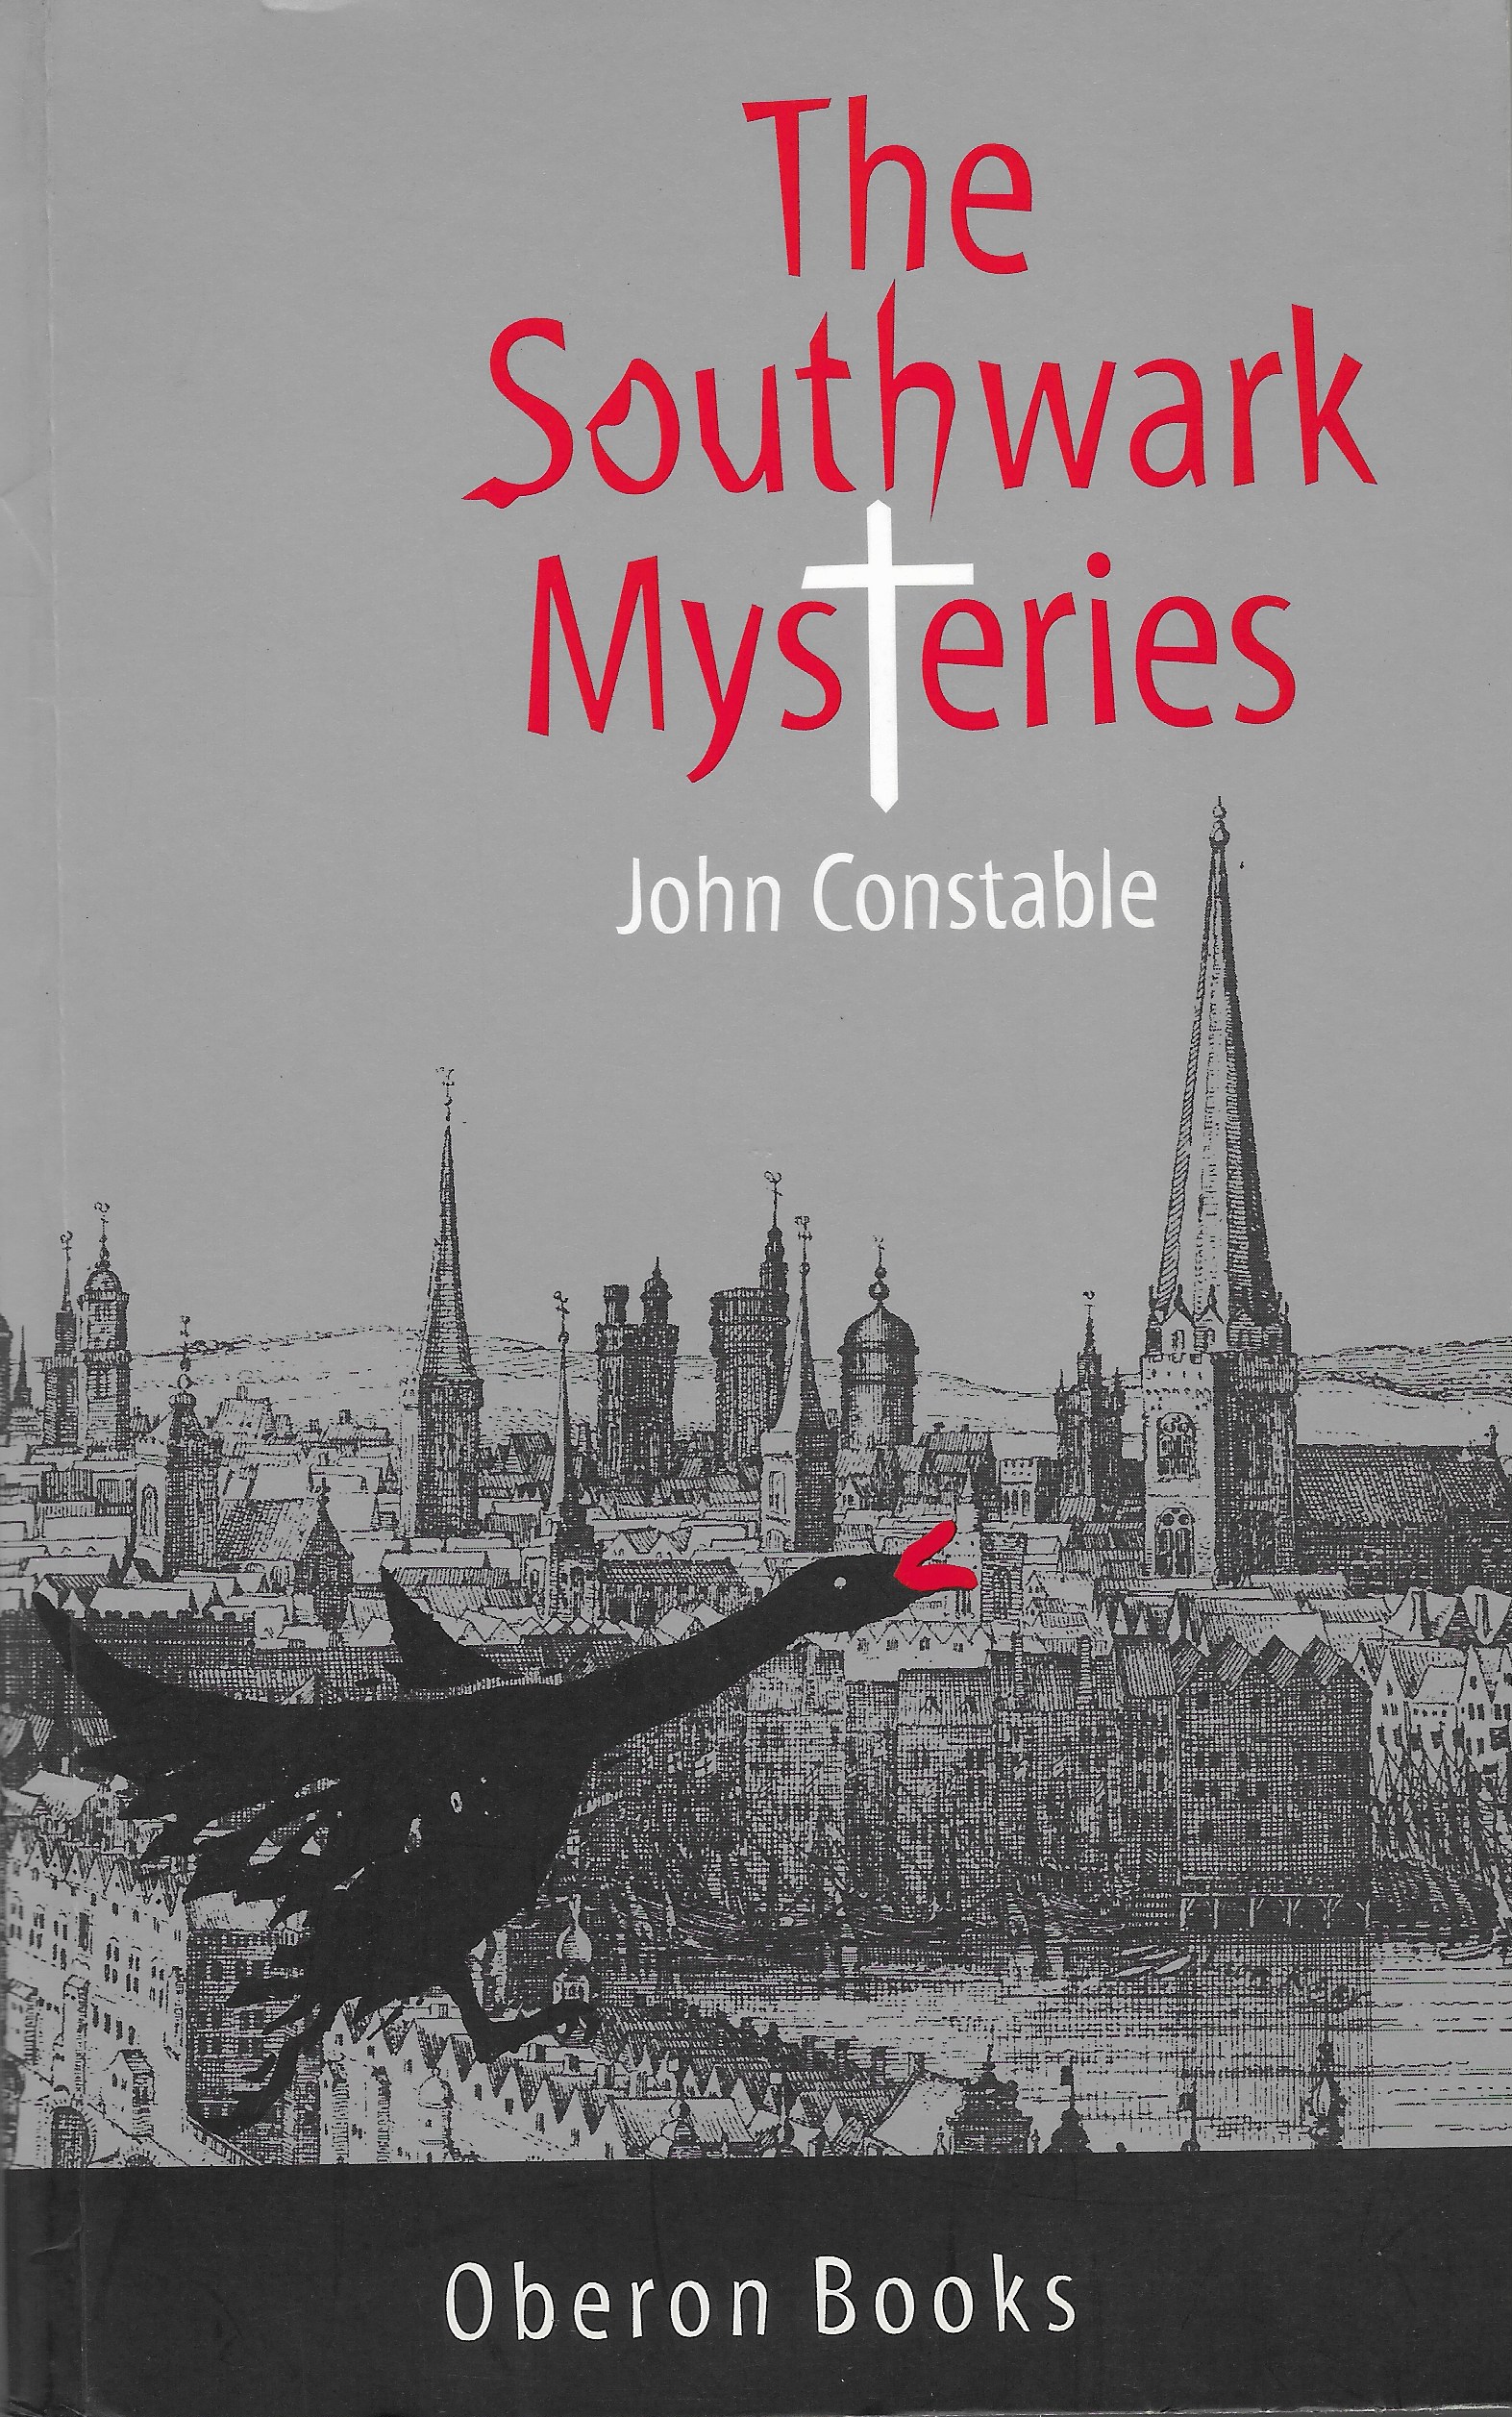 The Southwark Mysteries